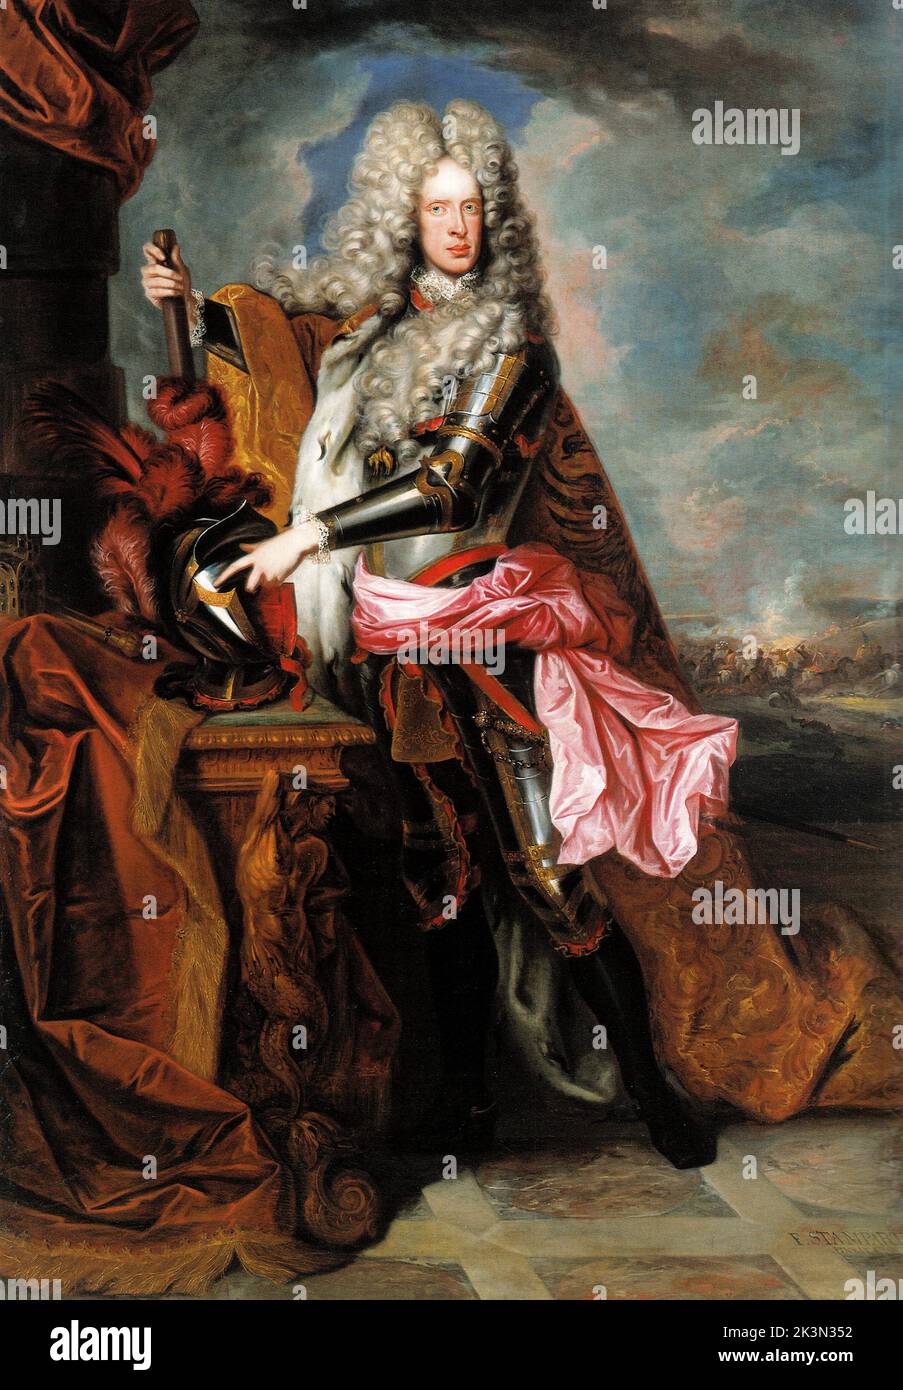 Joseph I (1678 – 1711) Holy Roman Emperor and ruler of the Austrian Habsburg monarchy from 1705 until his death in 1711. Stock Photo